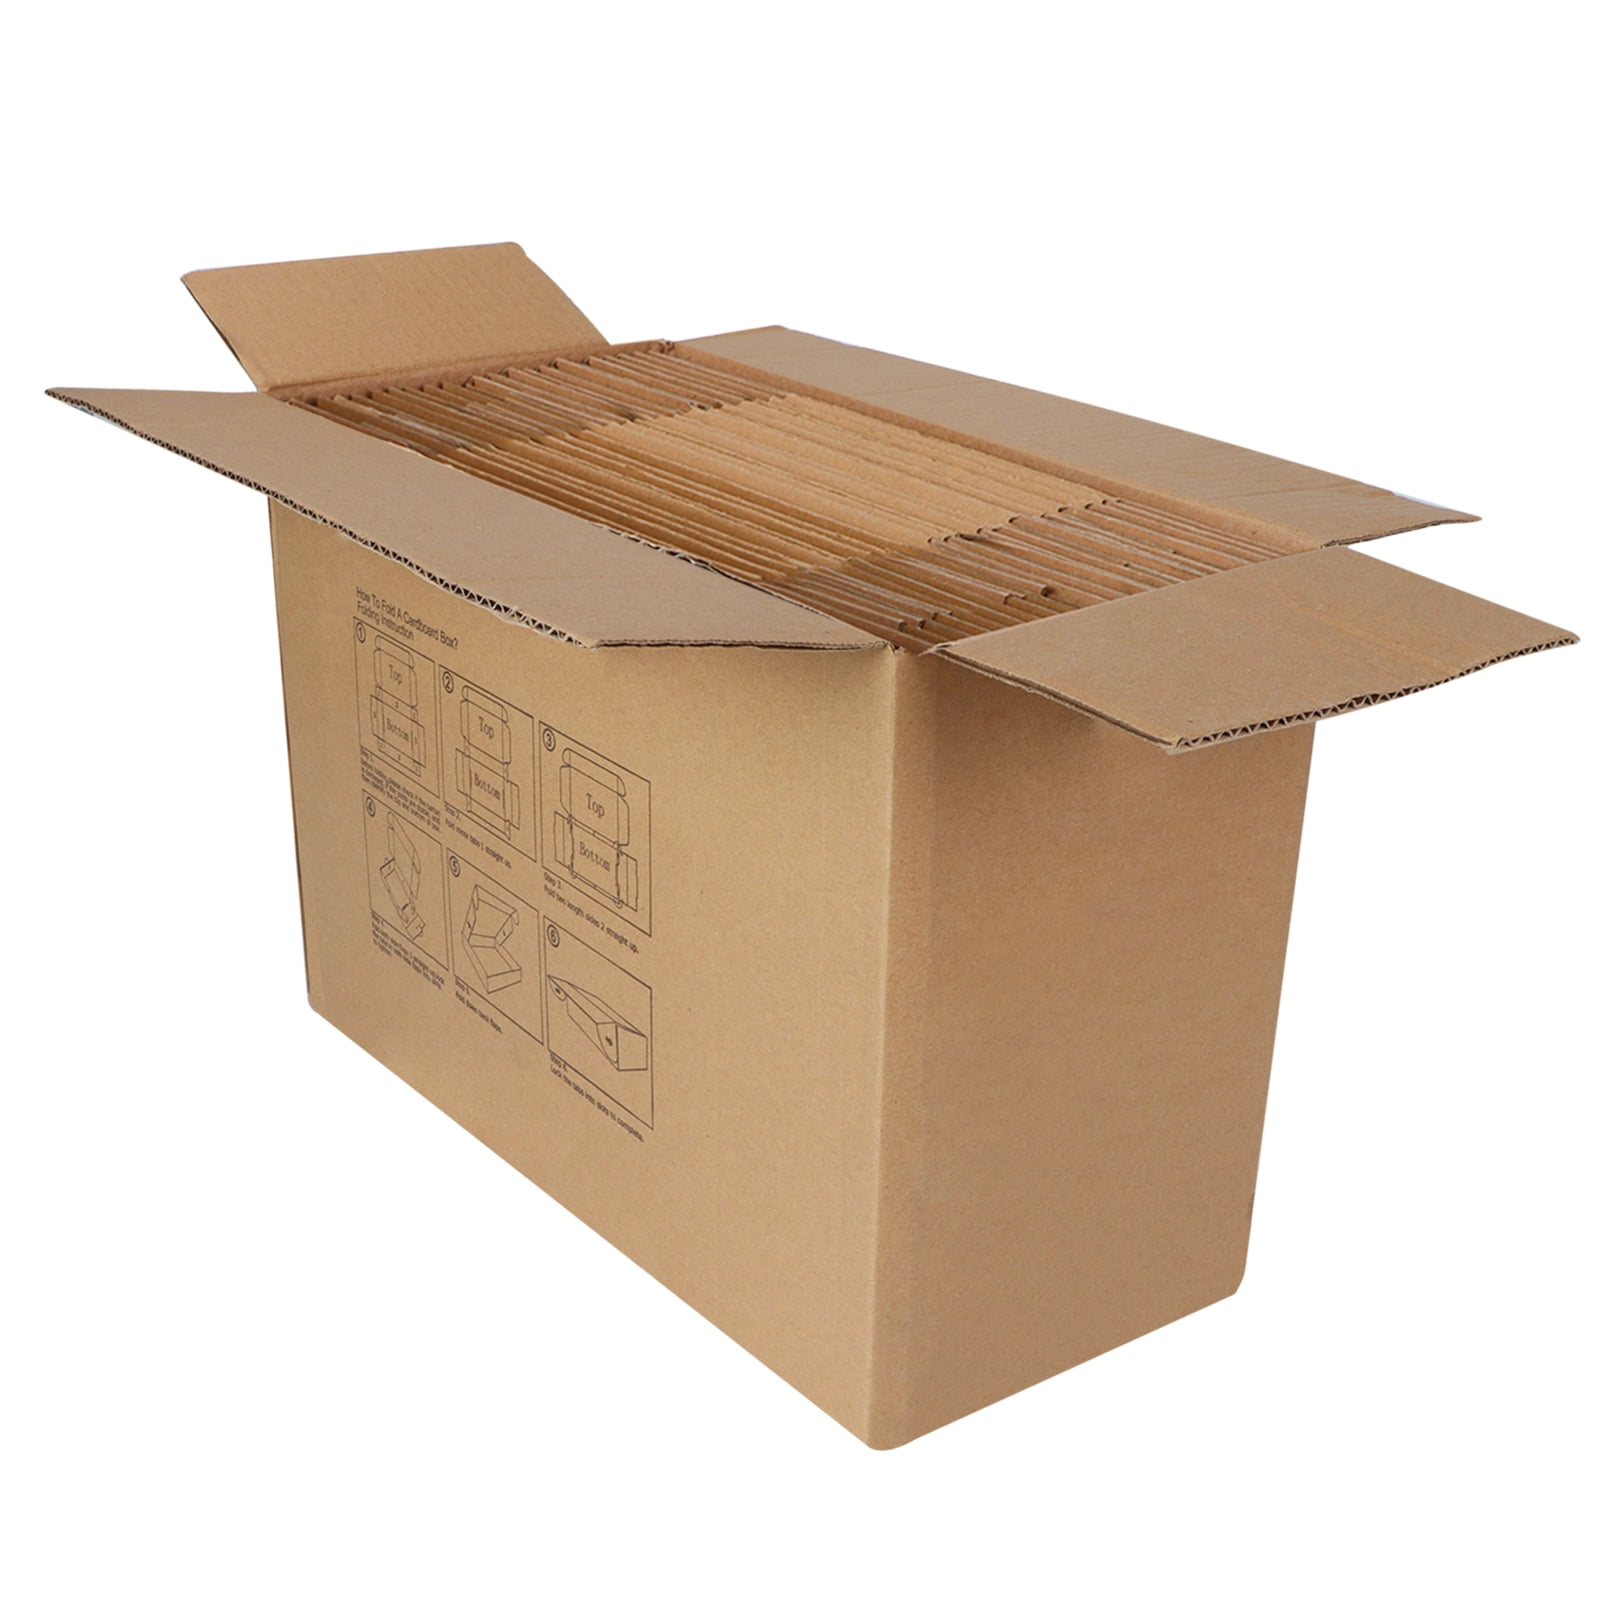 9 best places to buy cardboard boxes in 2022